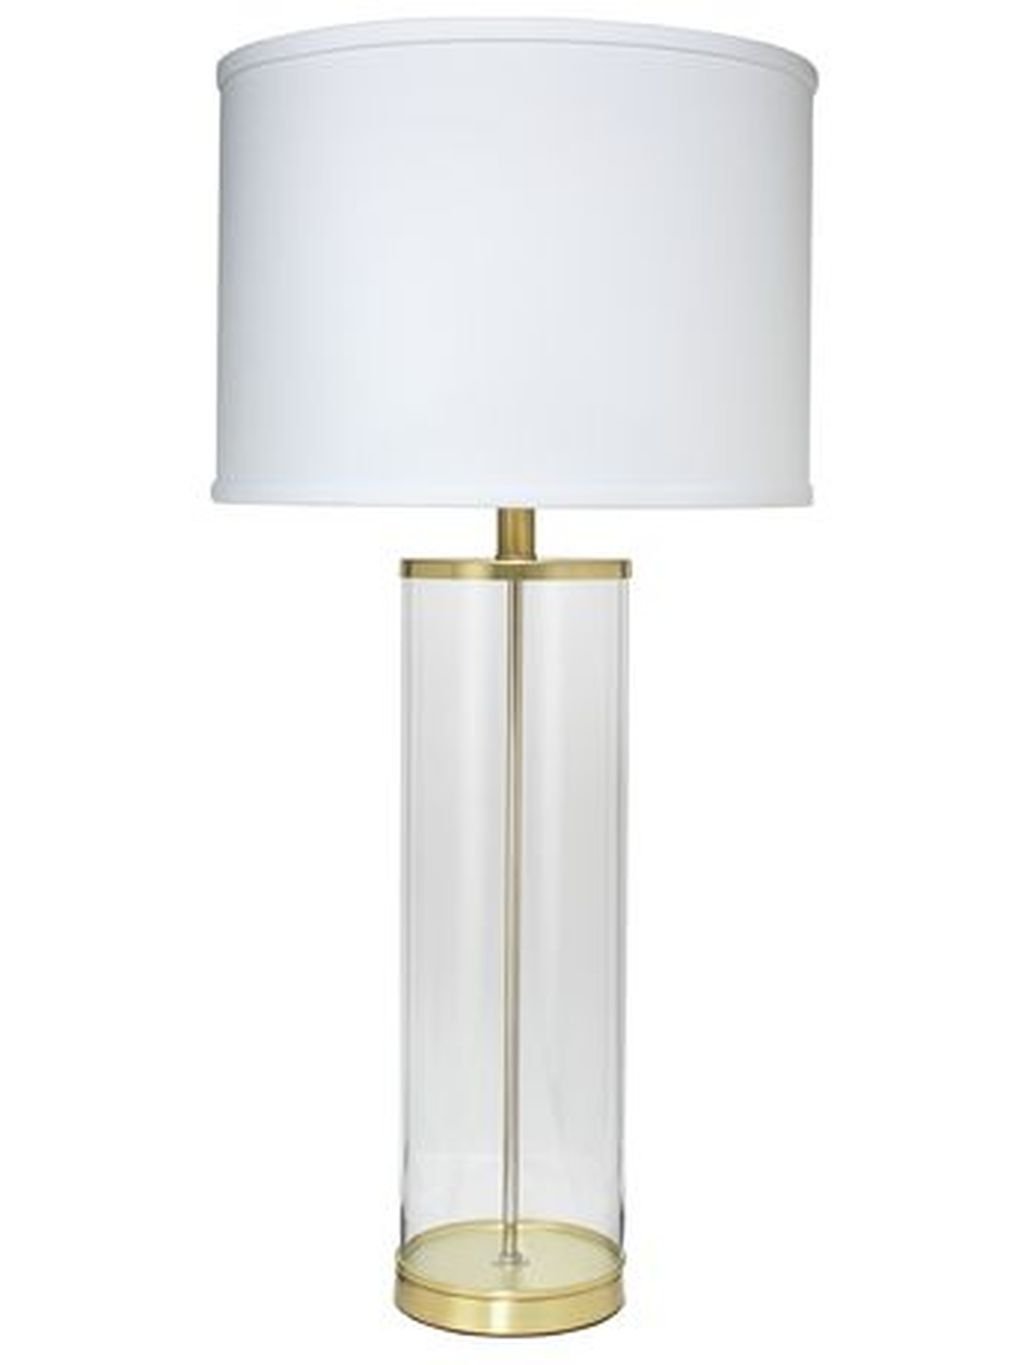 Awesome Table Lamp Ideas To Brighten Up Your Work Space 31